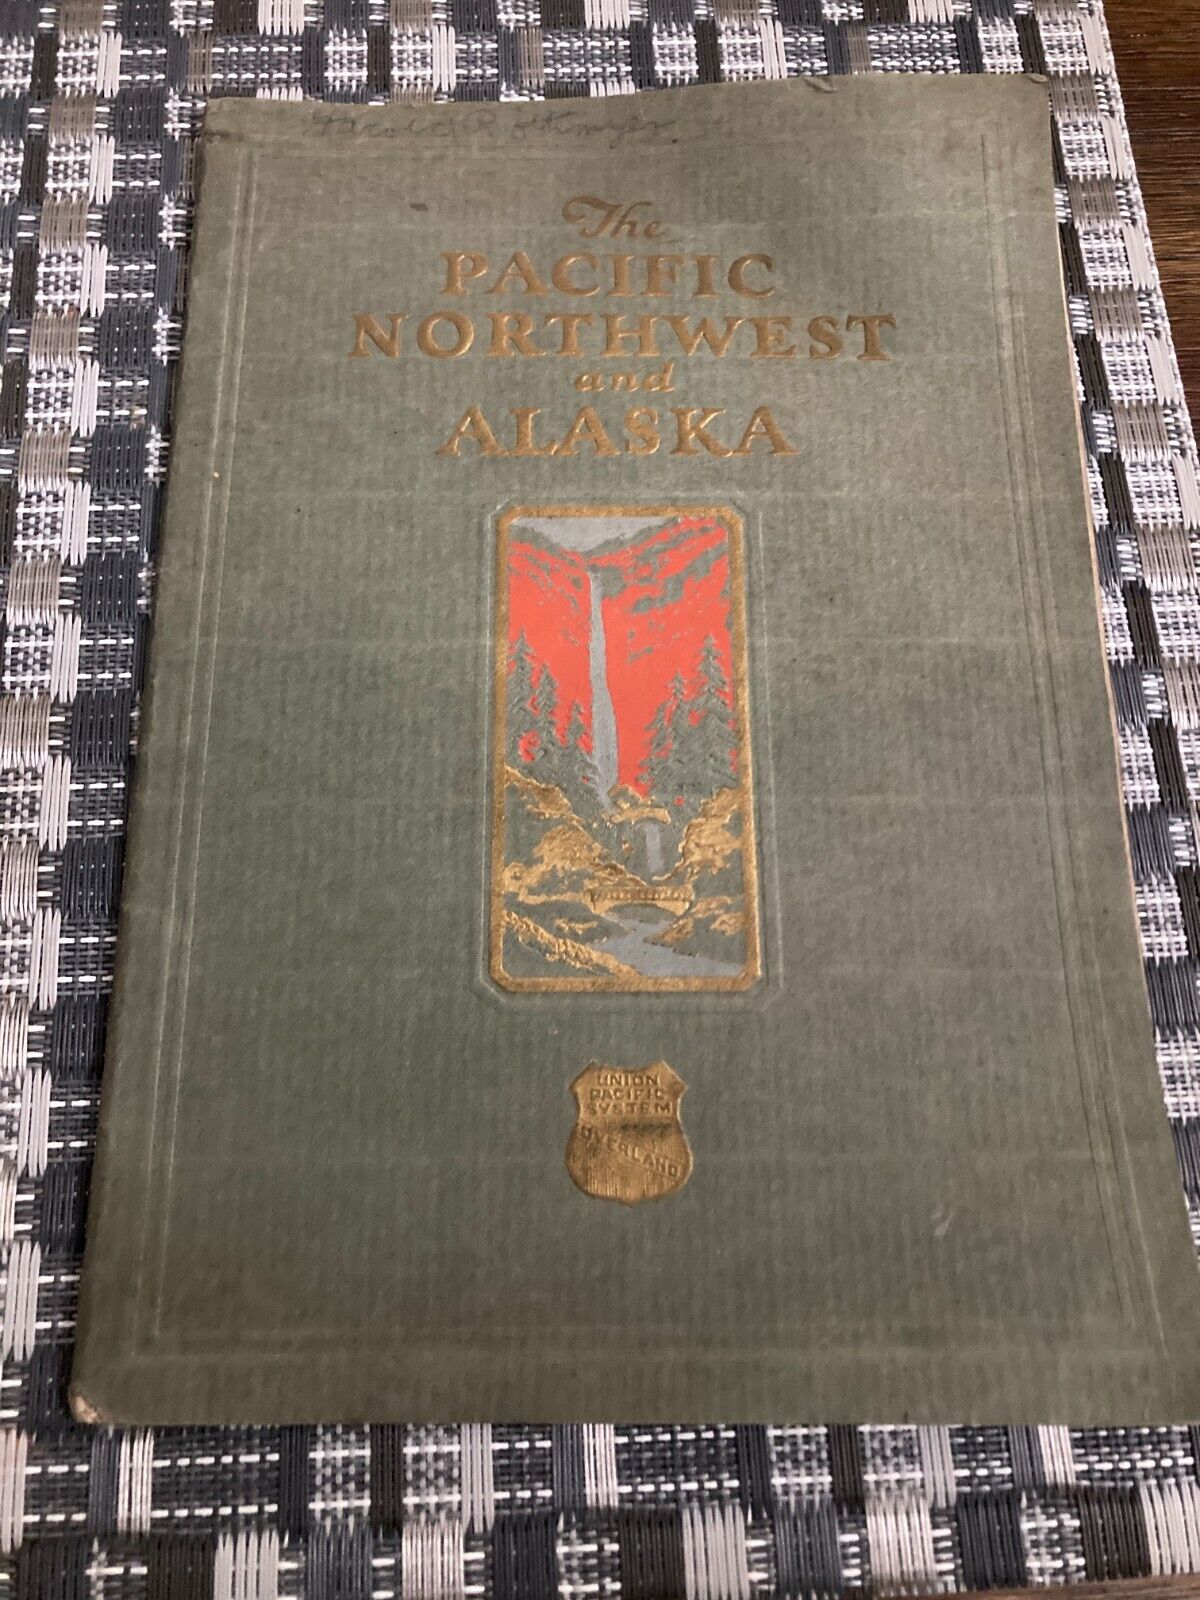 1929 Union Pacific Railroad Overland The Pacific Northwest & Alaska Booklet/Maps